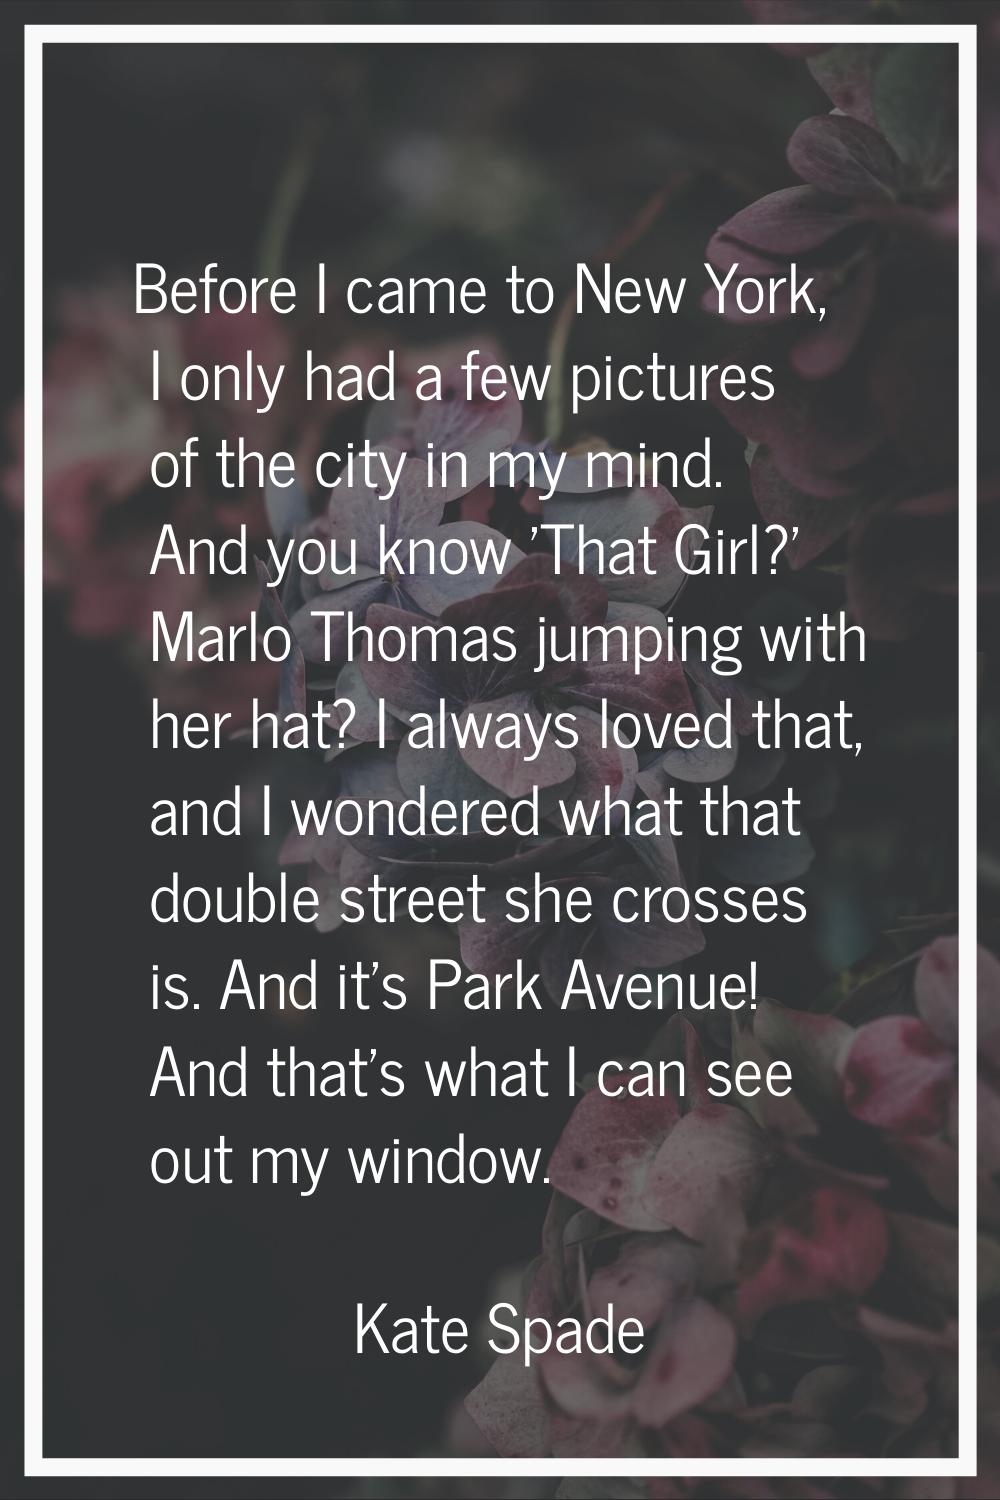 Before I came to New York, I only had a few pictures of the city in my mind. And you know 'That Gir